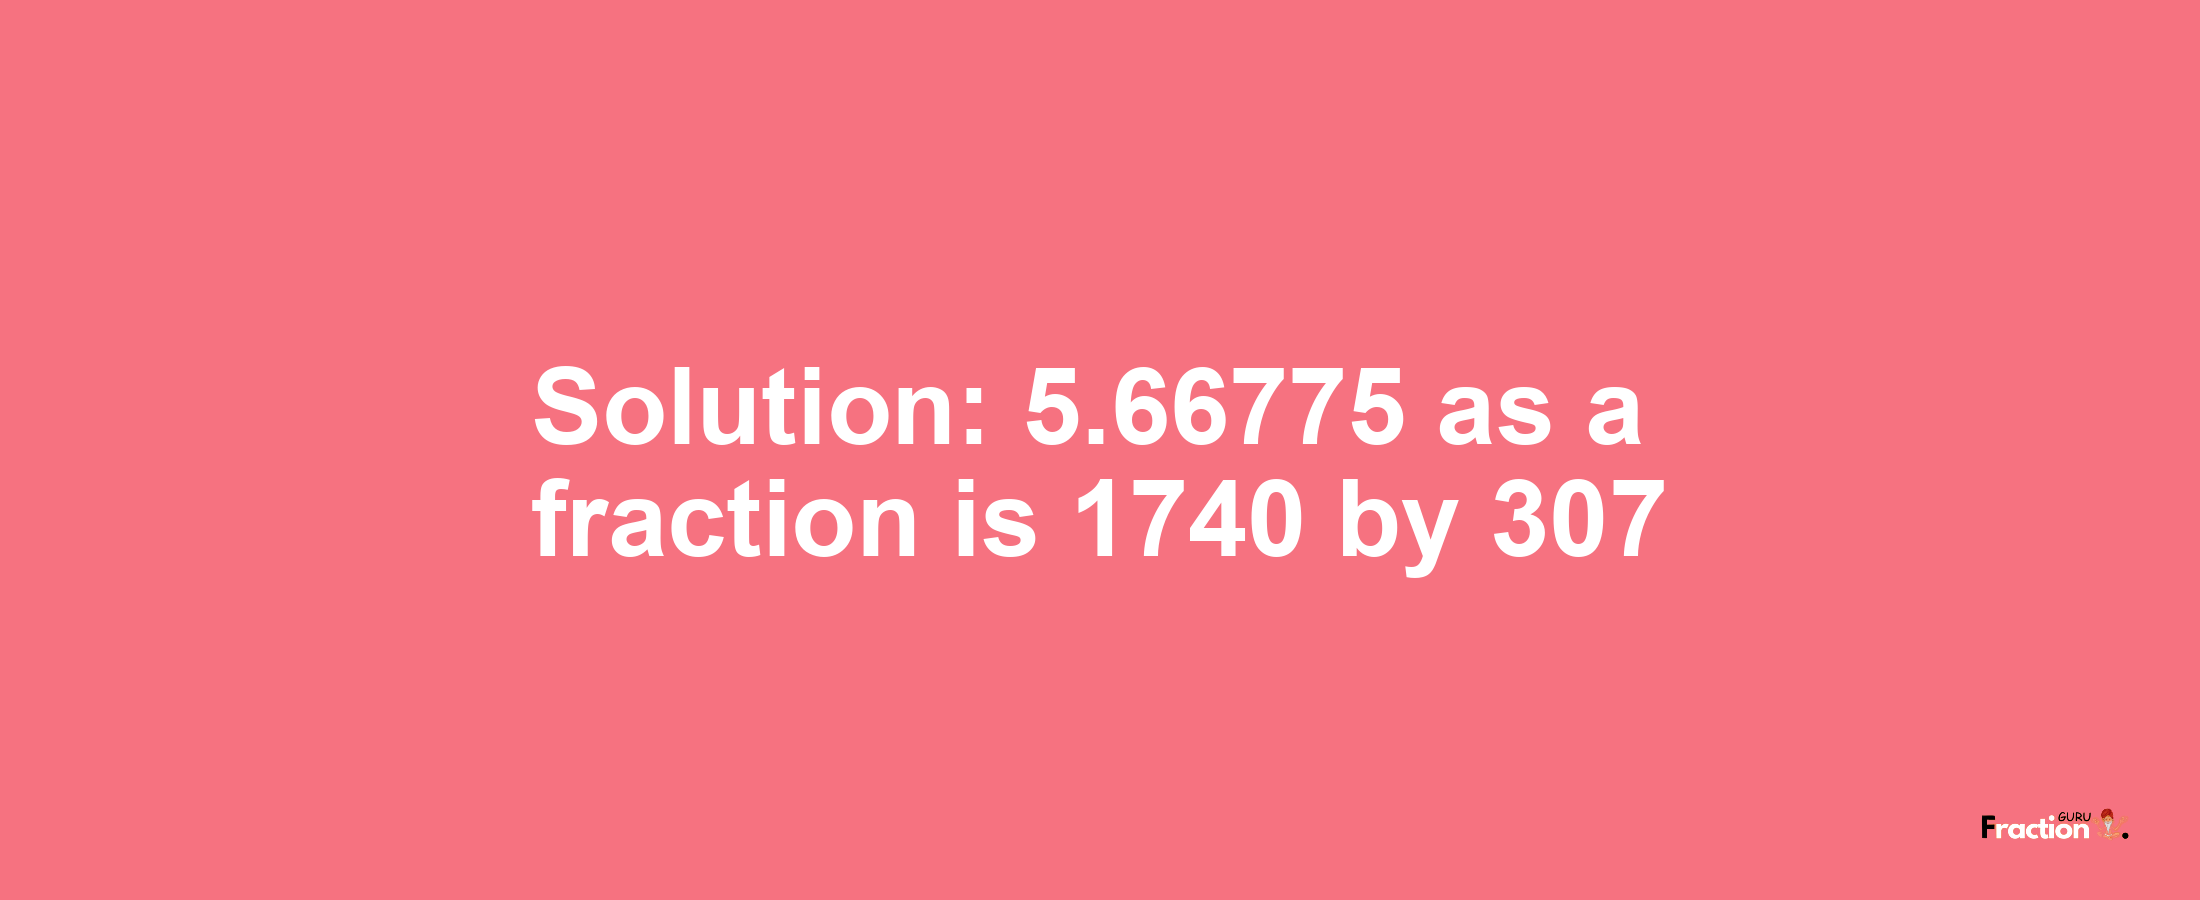 Solution:5.66775 as a fraction is 1740/307